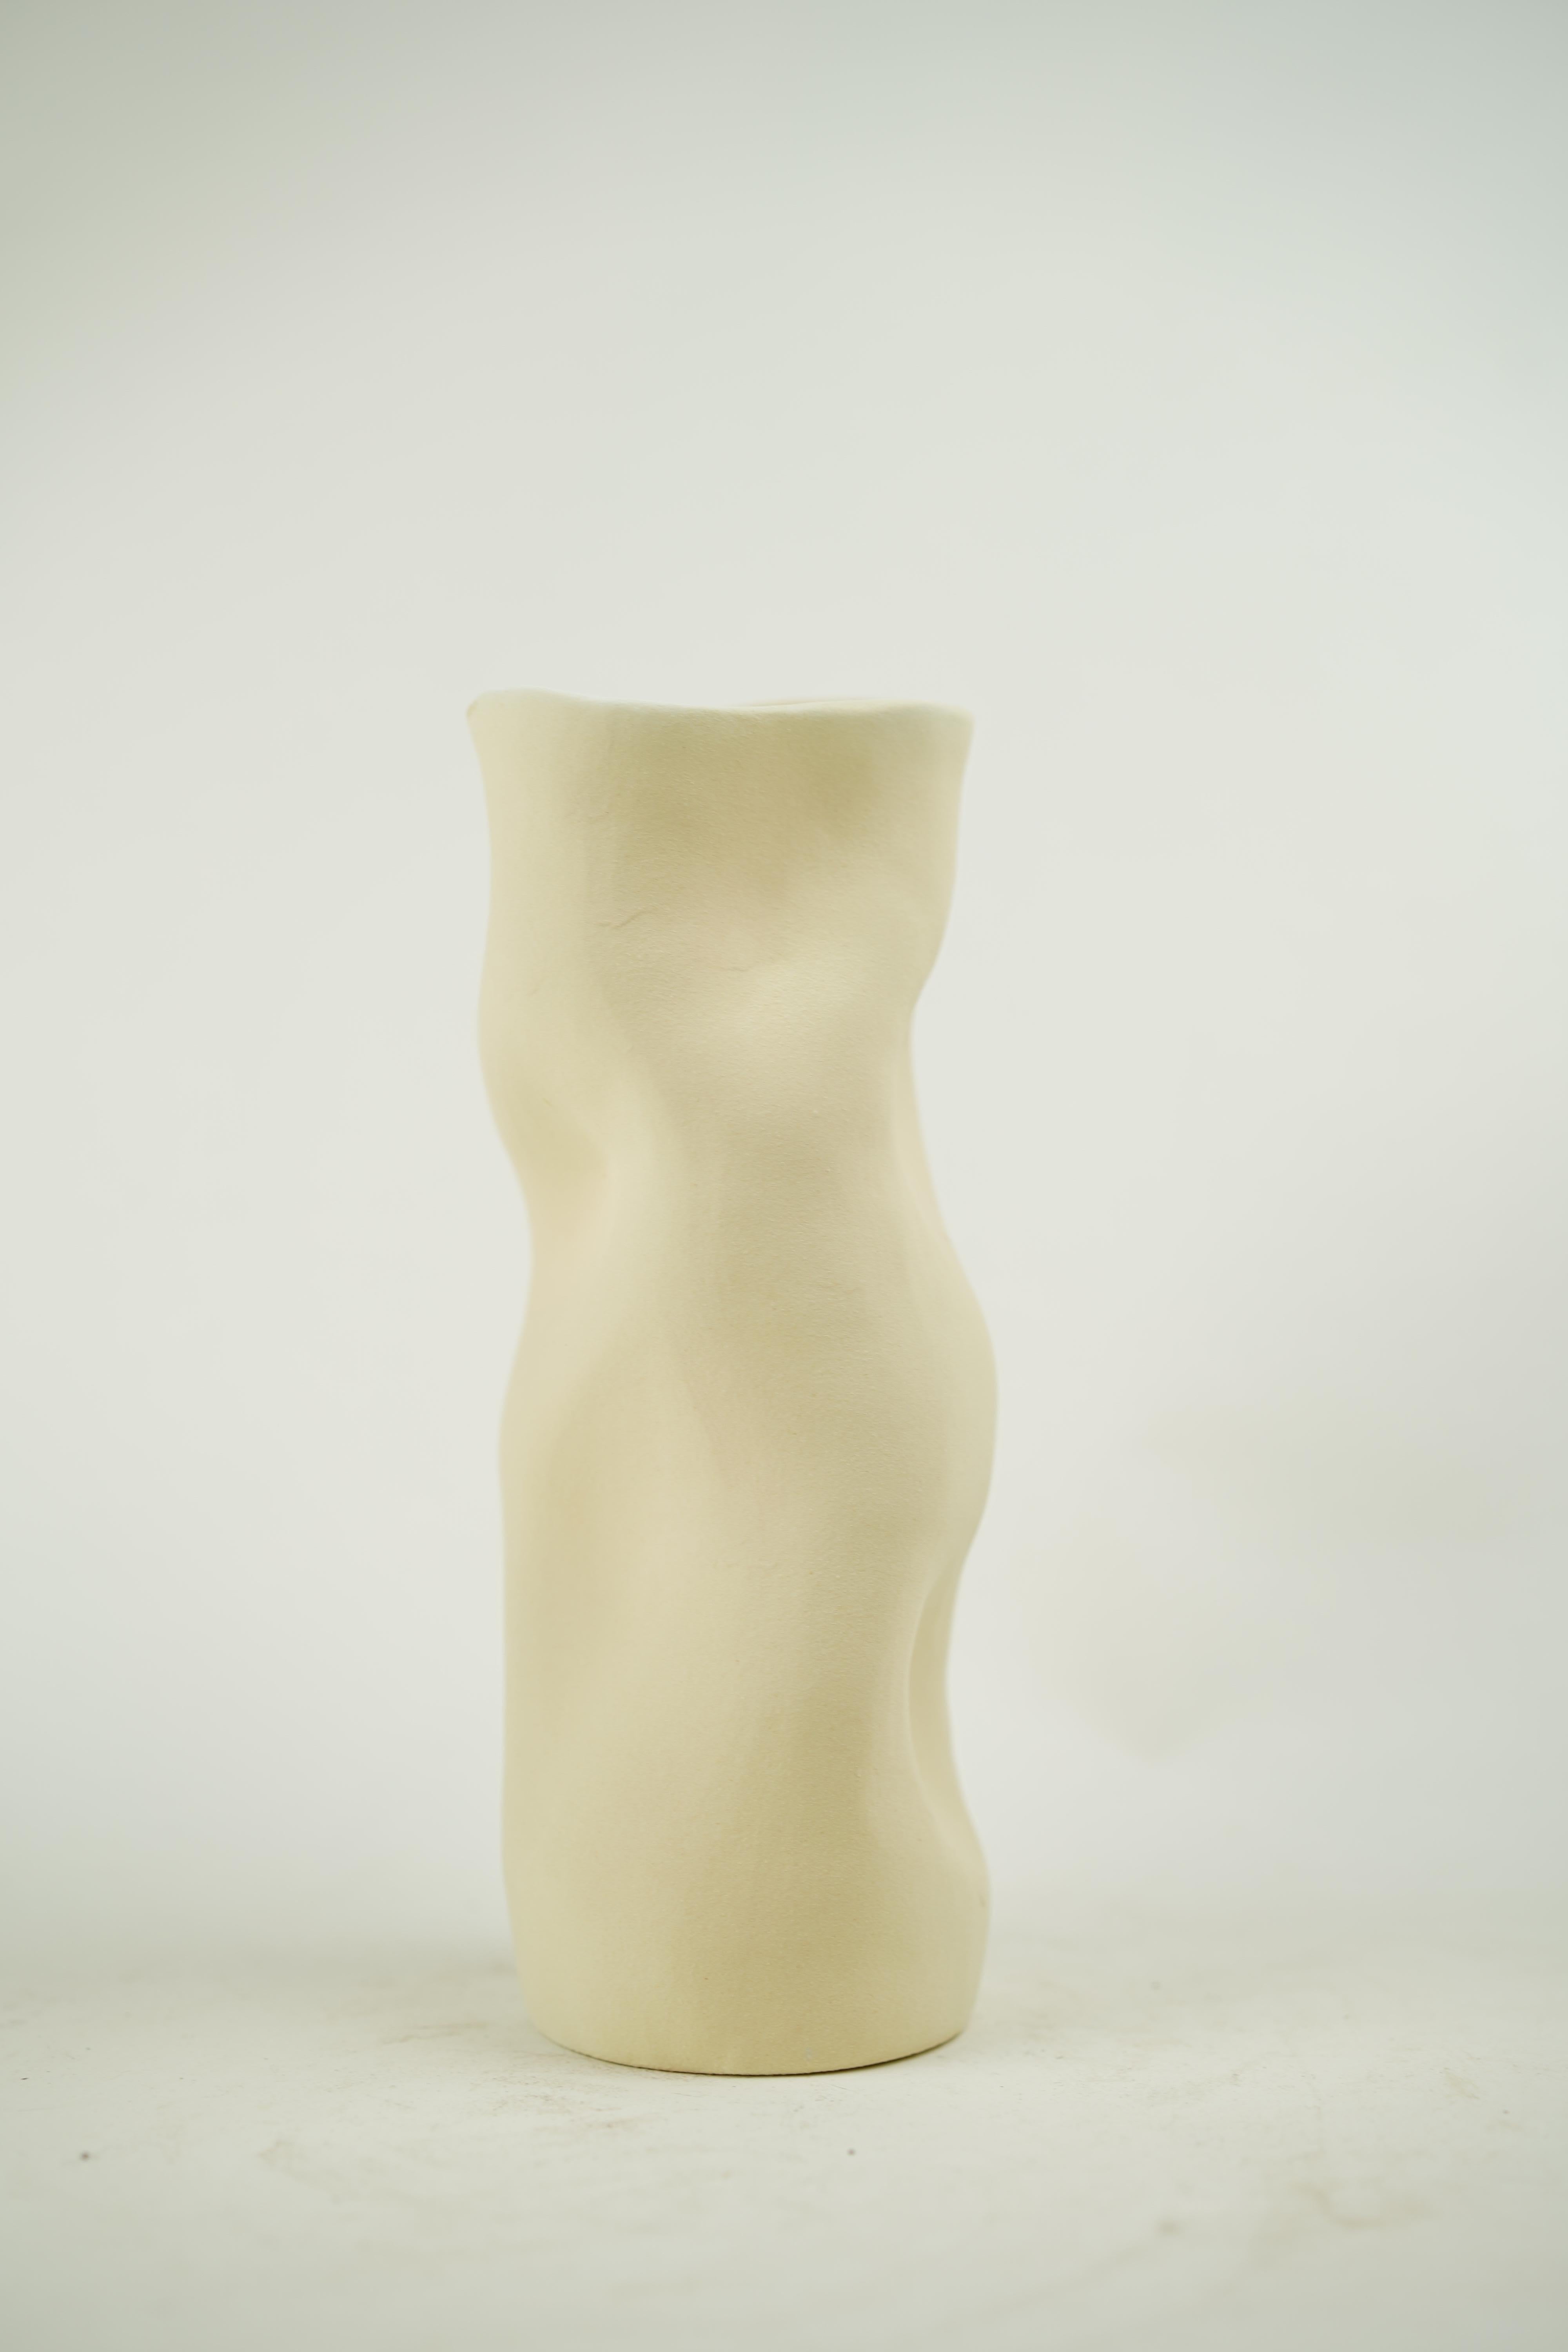 Earthly Body Organic Vase, Available in 4 Colours For Sale 4